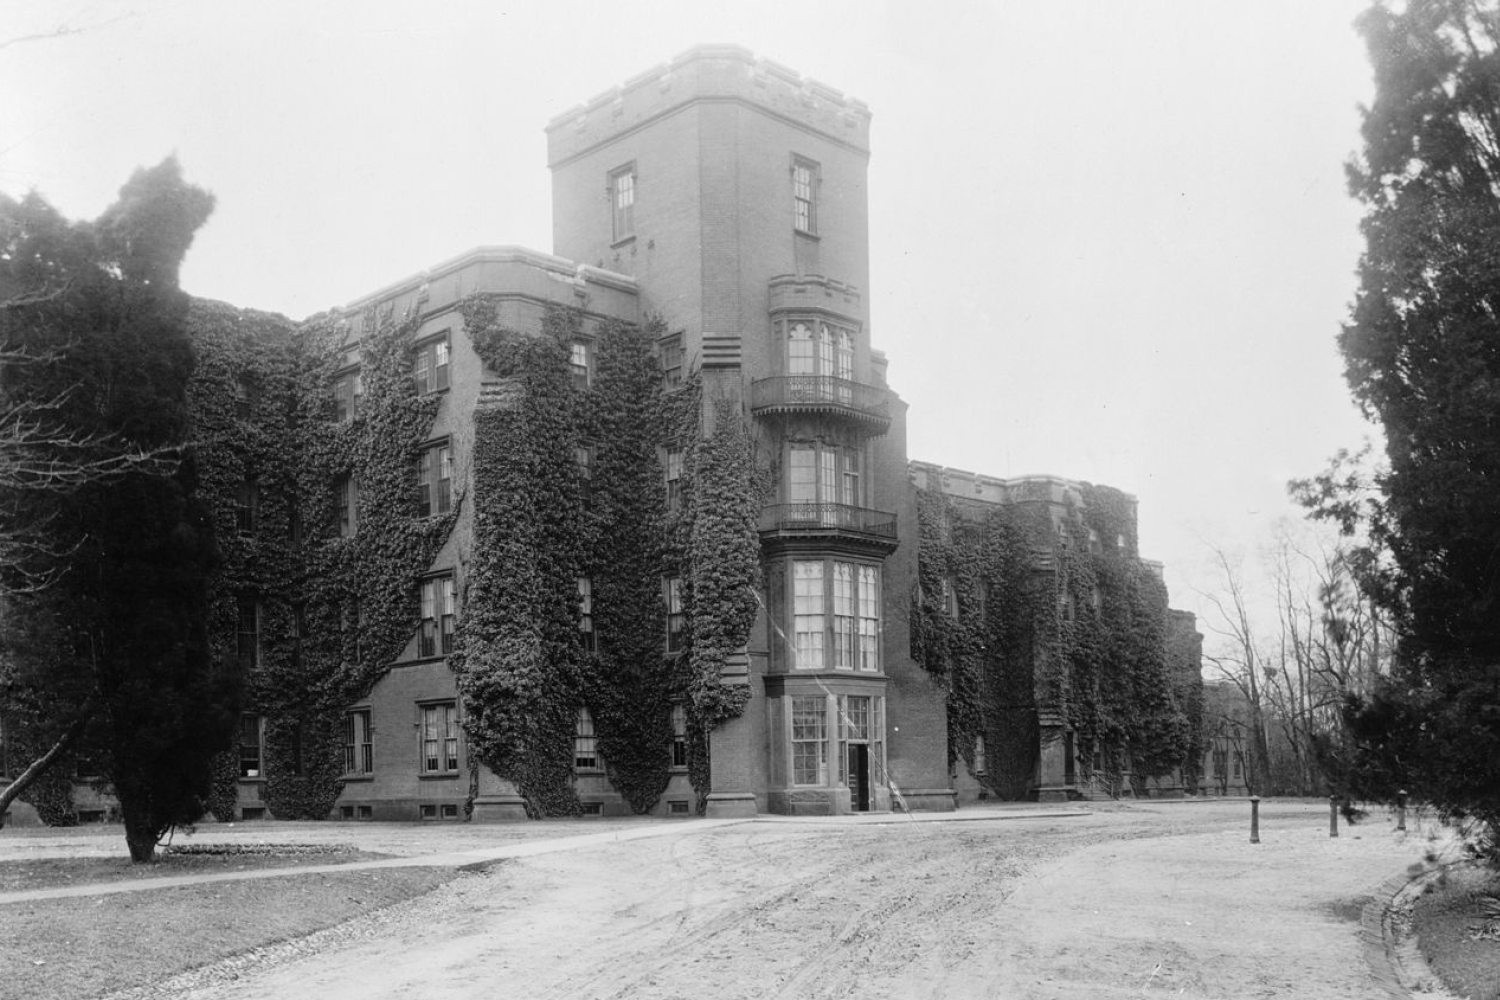 St. Elizabeths, opened in 1855, was designed to take full advantage of its natural surroundings. 